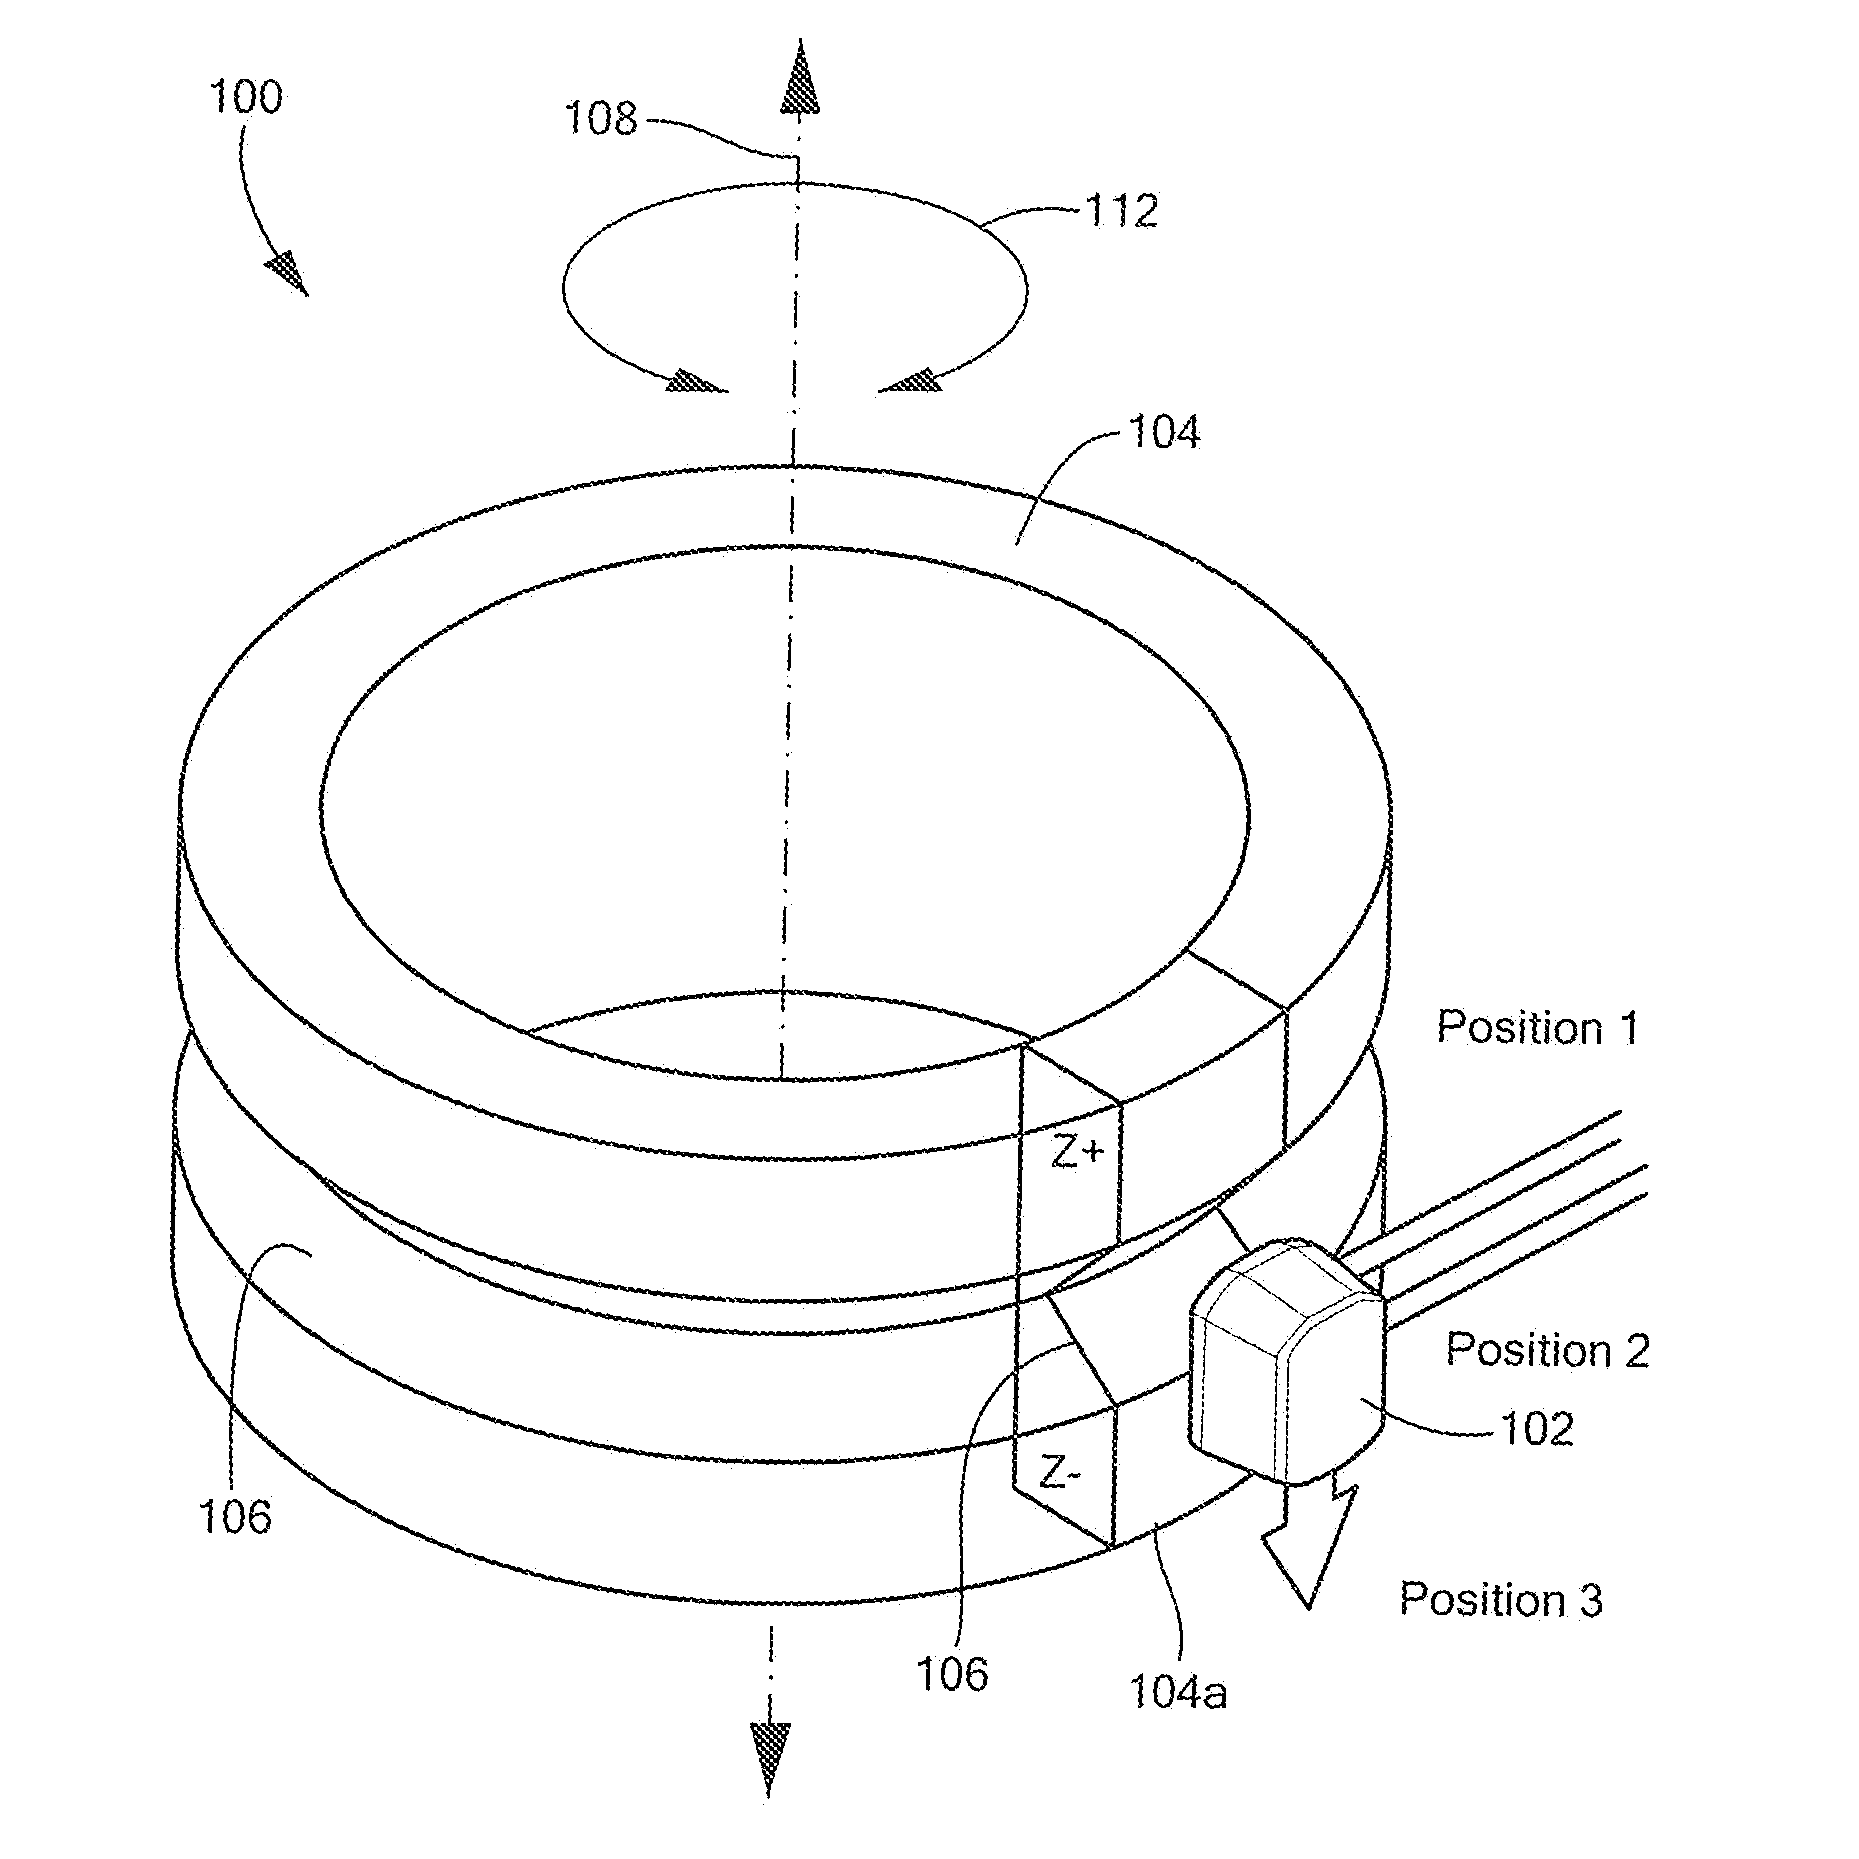 Magnetic Field Sensor and Method For Sensing Relative Location of the Magnetic Field Sensor and a Target Object Along a Movement Line